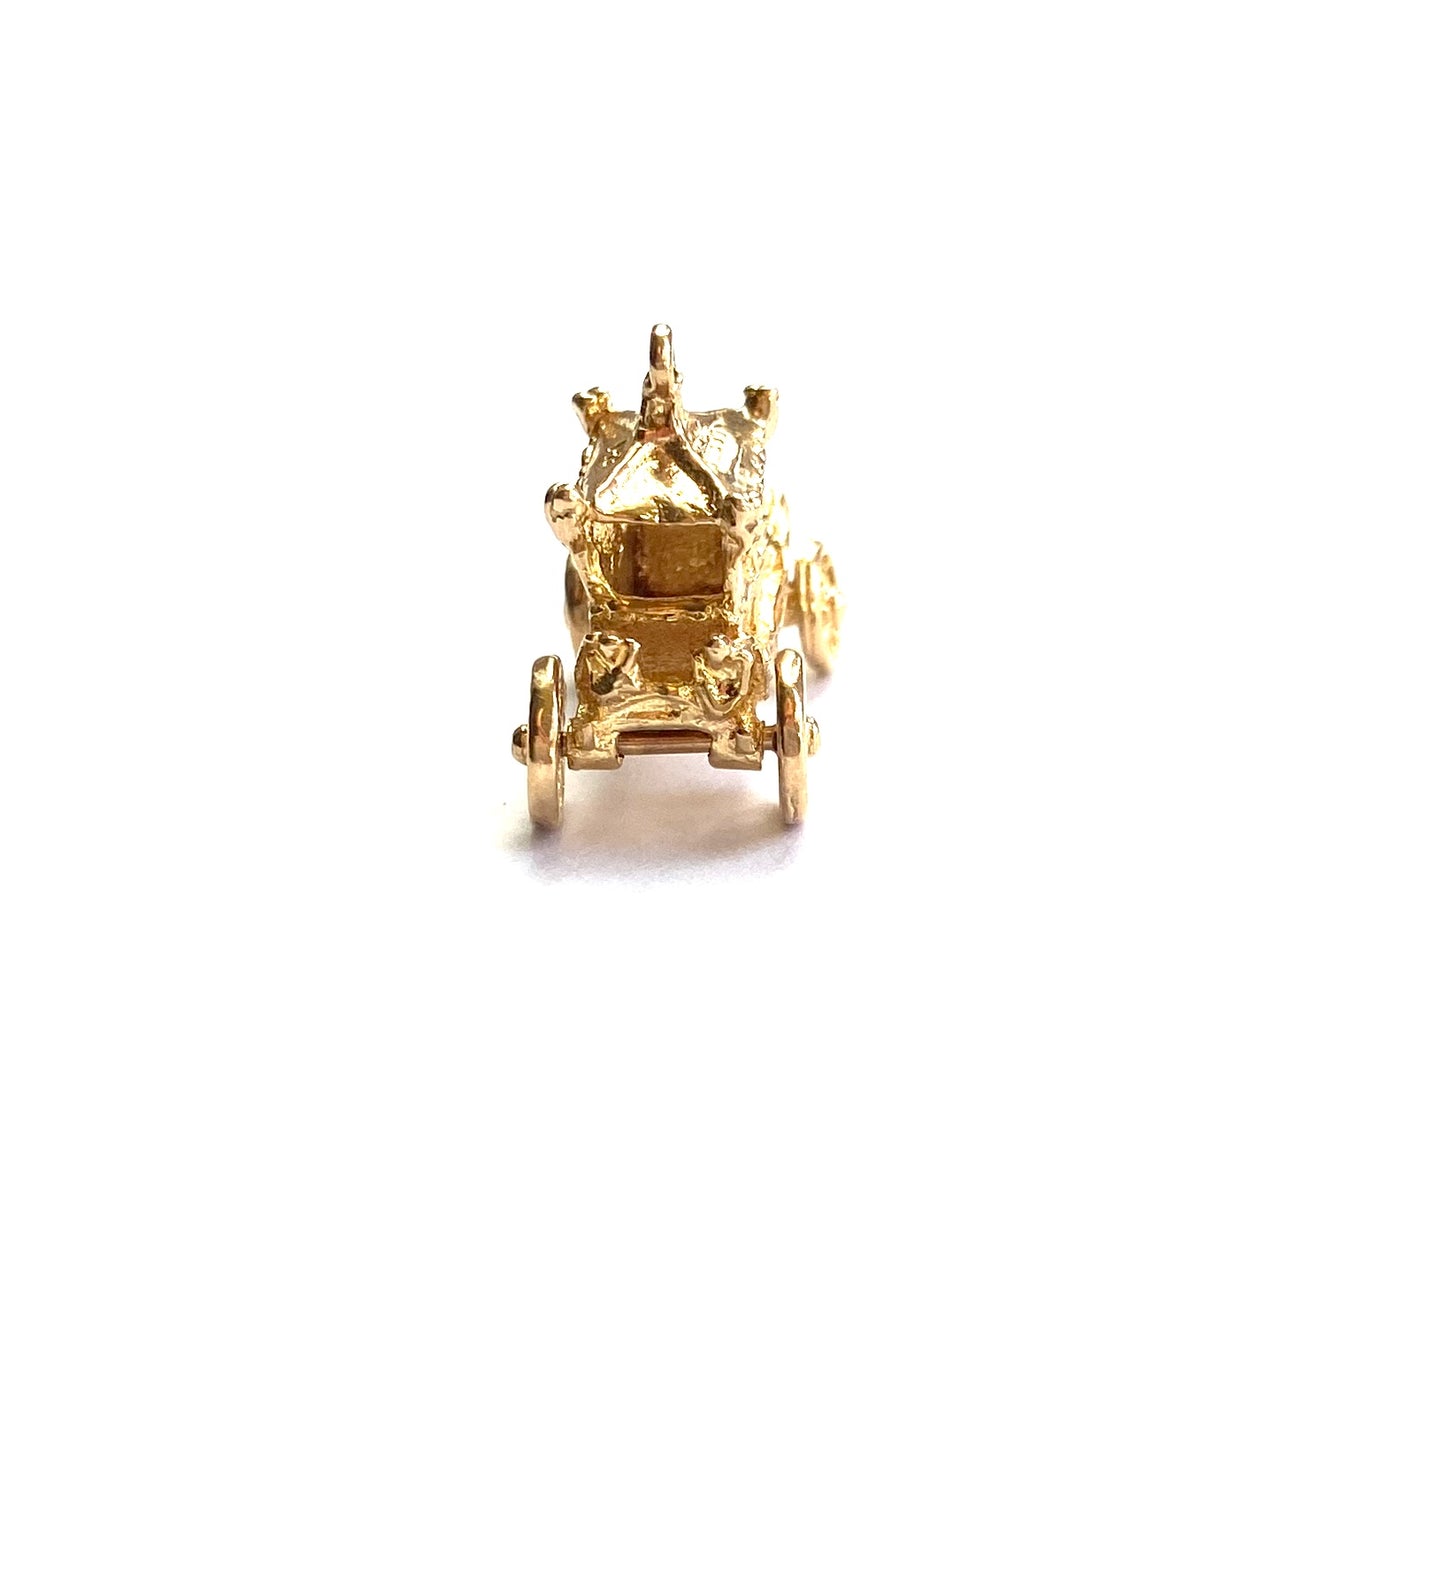 9ct vintage gold queens carriage charm circa 1962